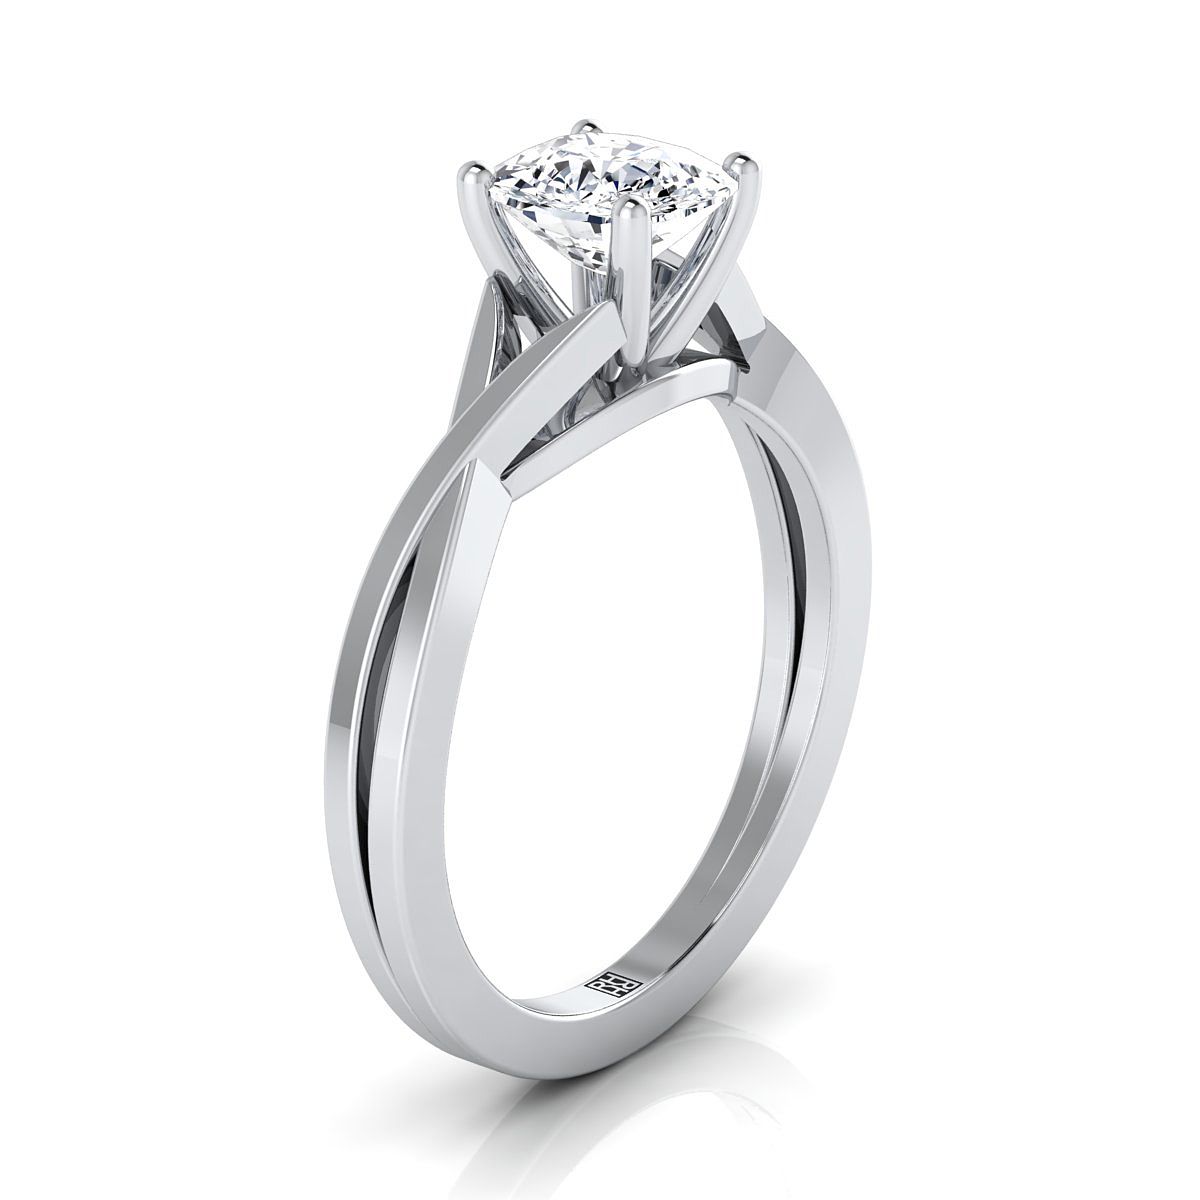 18K White Gold Cushion Delicate Twist Solitaire Engagement Ring